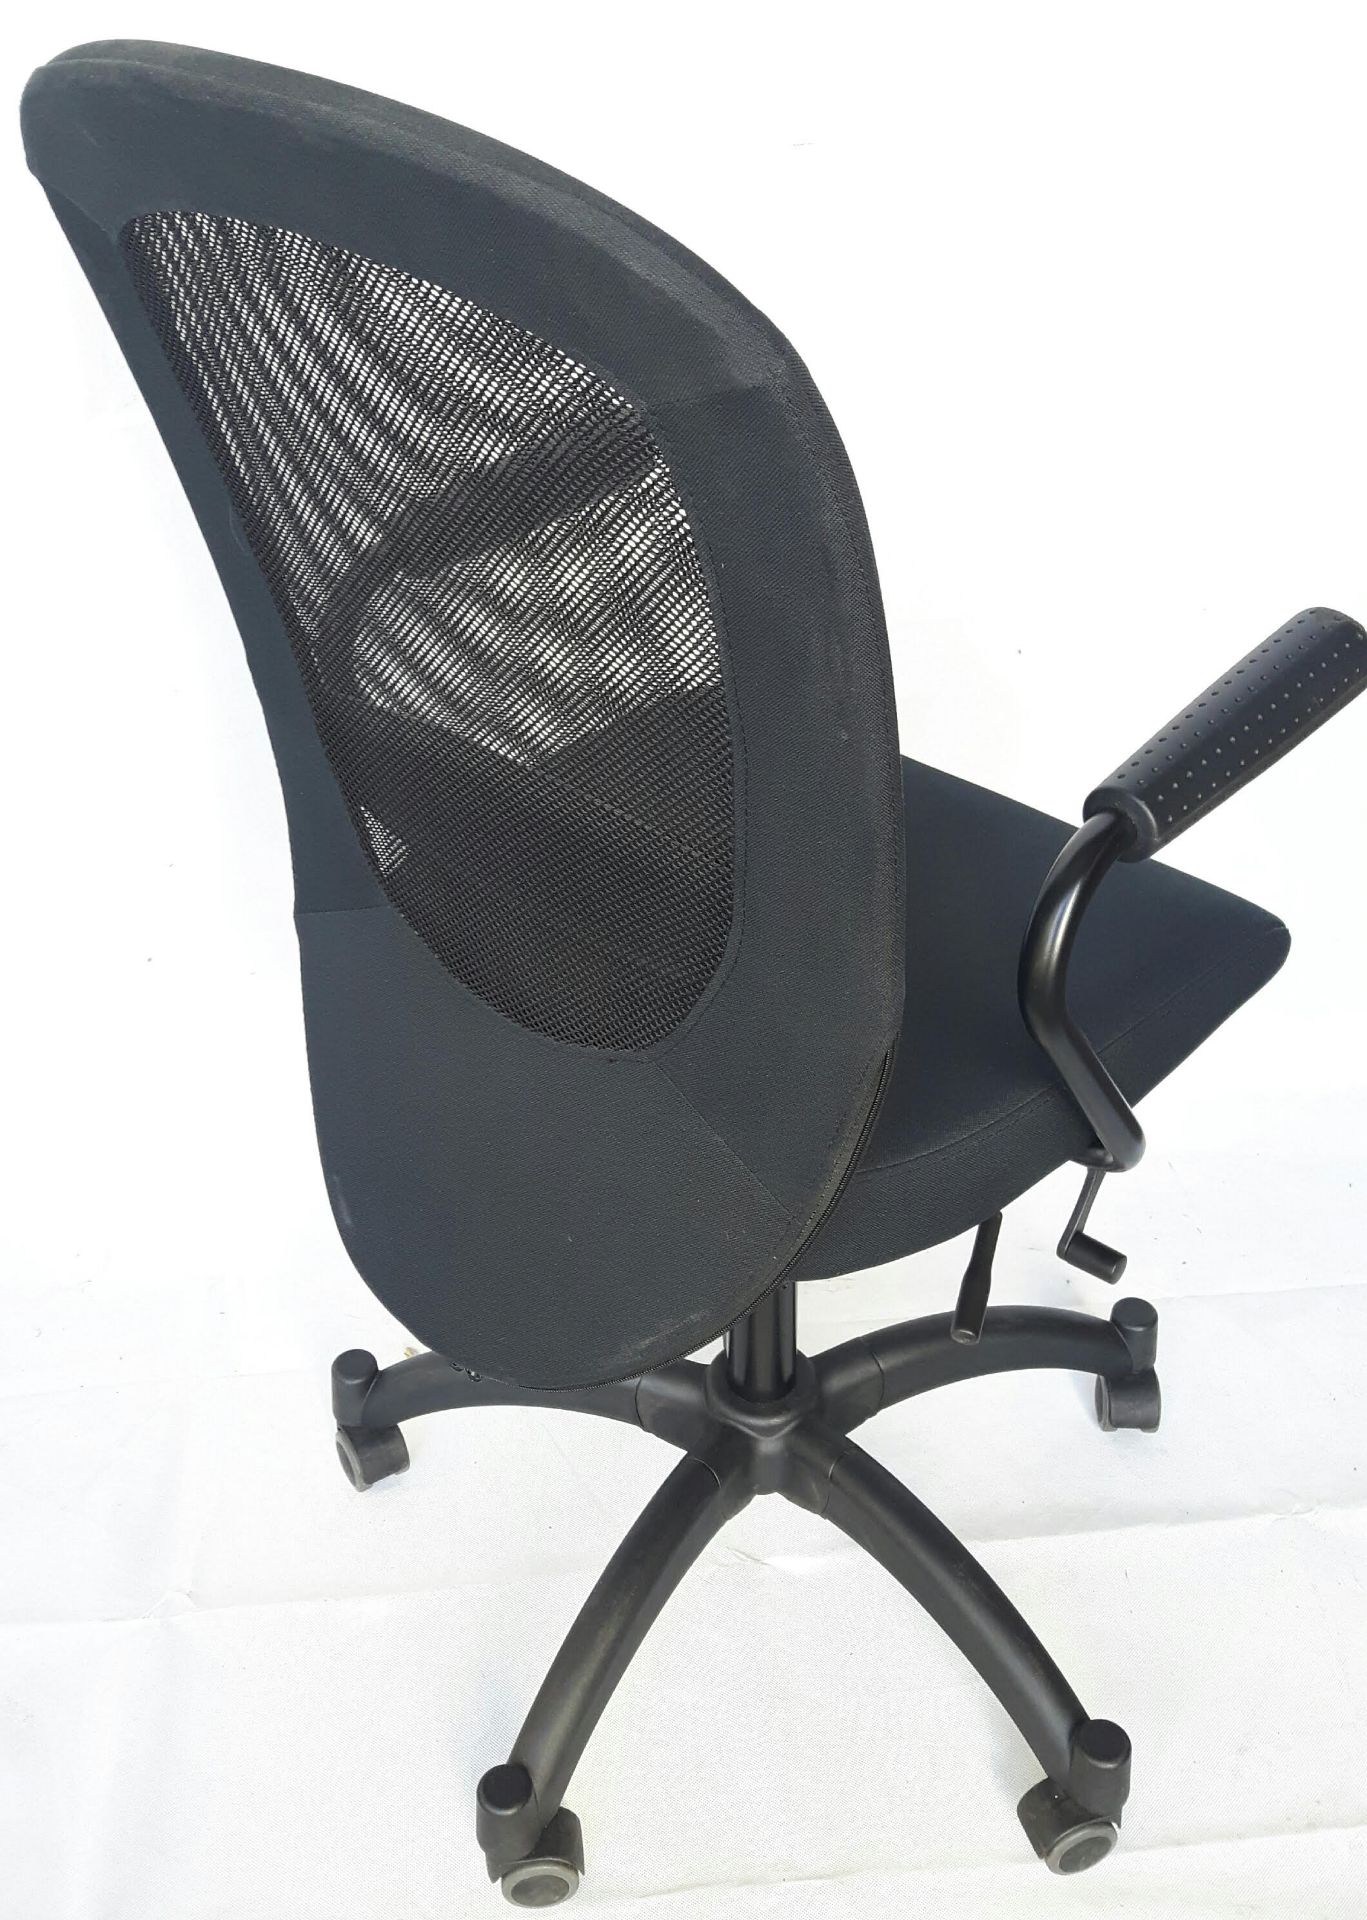 6 x FLINTAN/NOMINELL Swivel chair with armrests